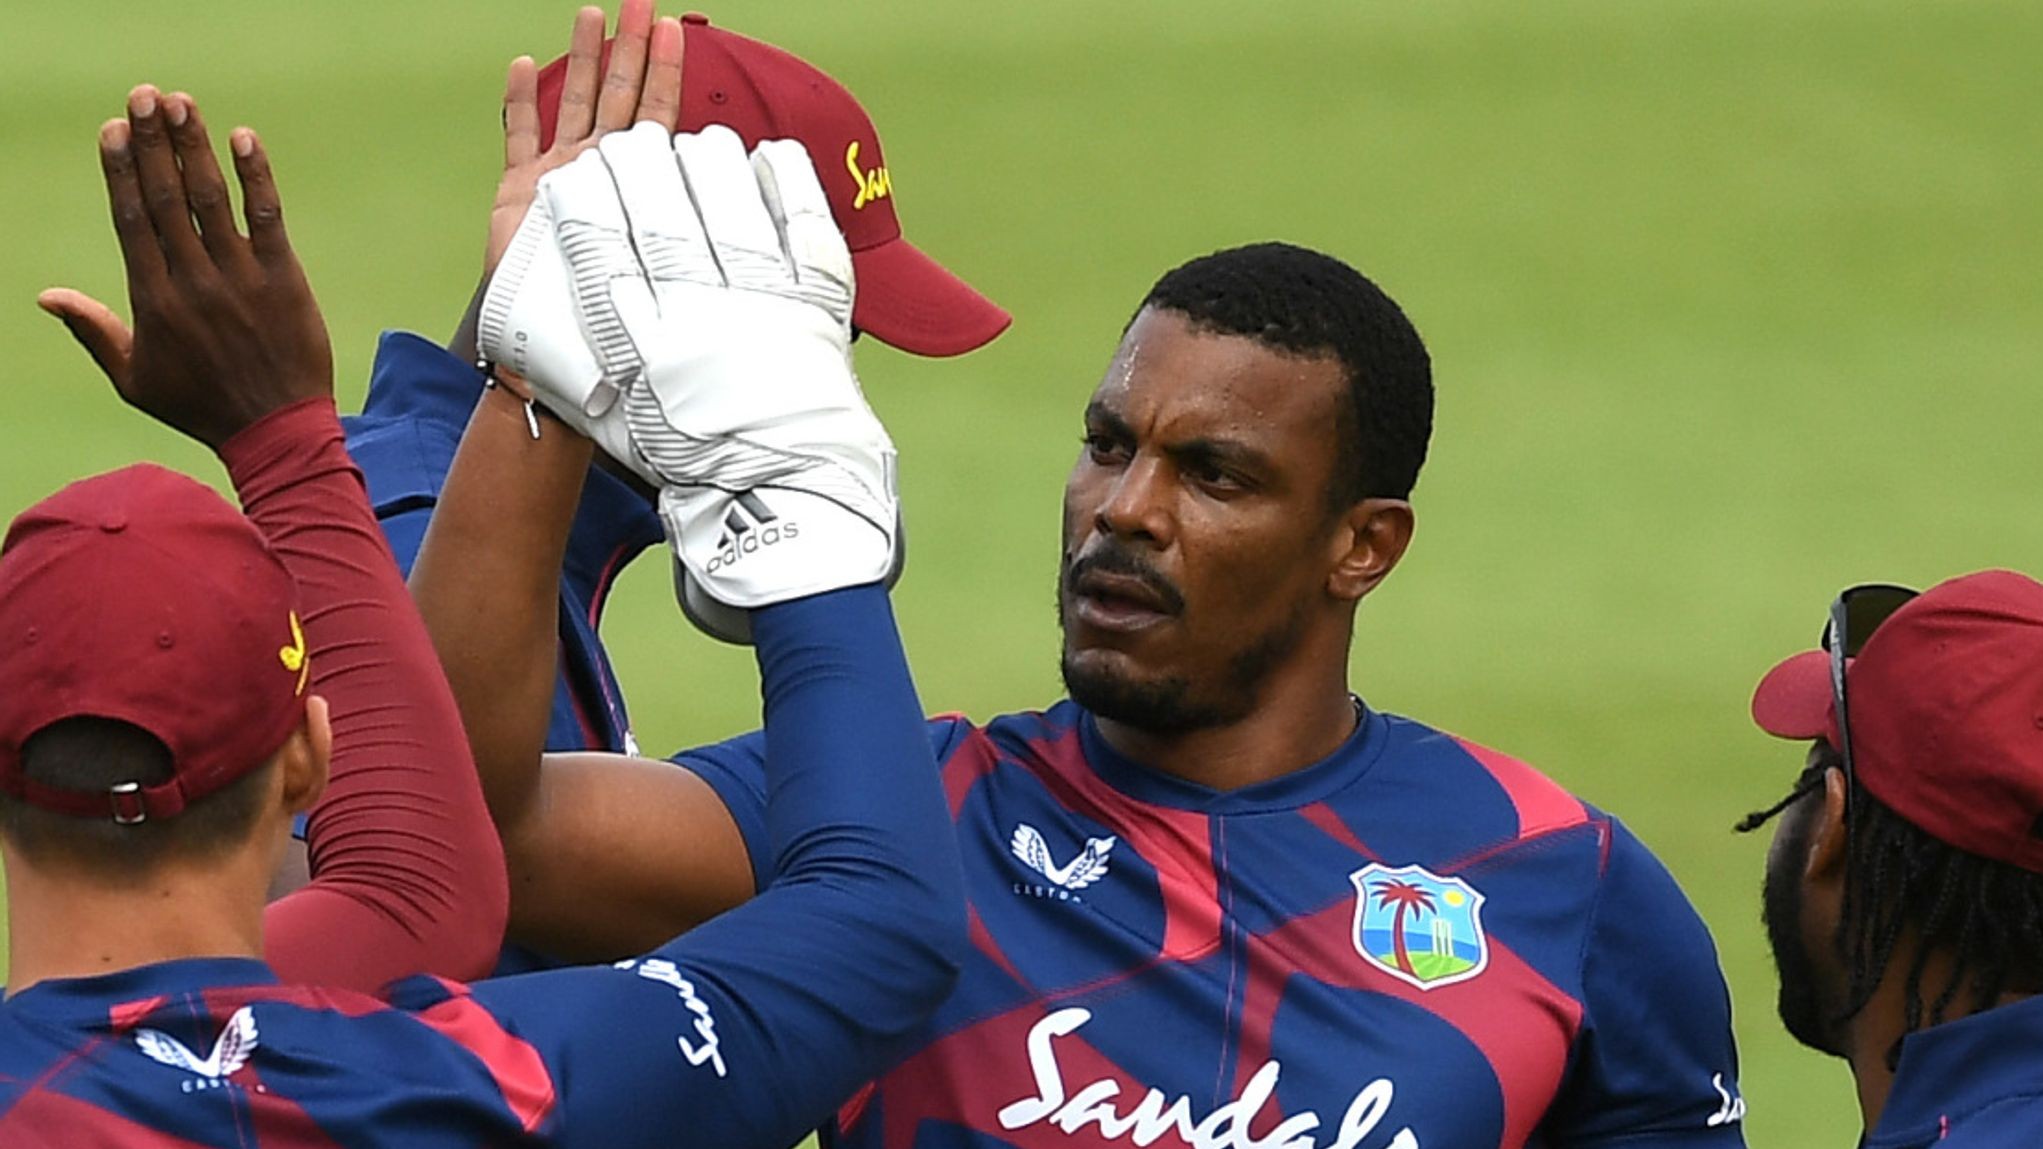 ENG v WI 2020: Shannon Gabriel officially named in West Indies squad for England Test series